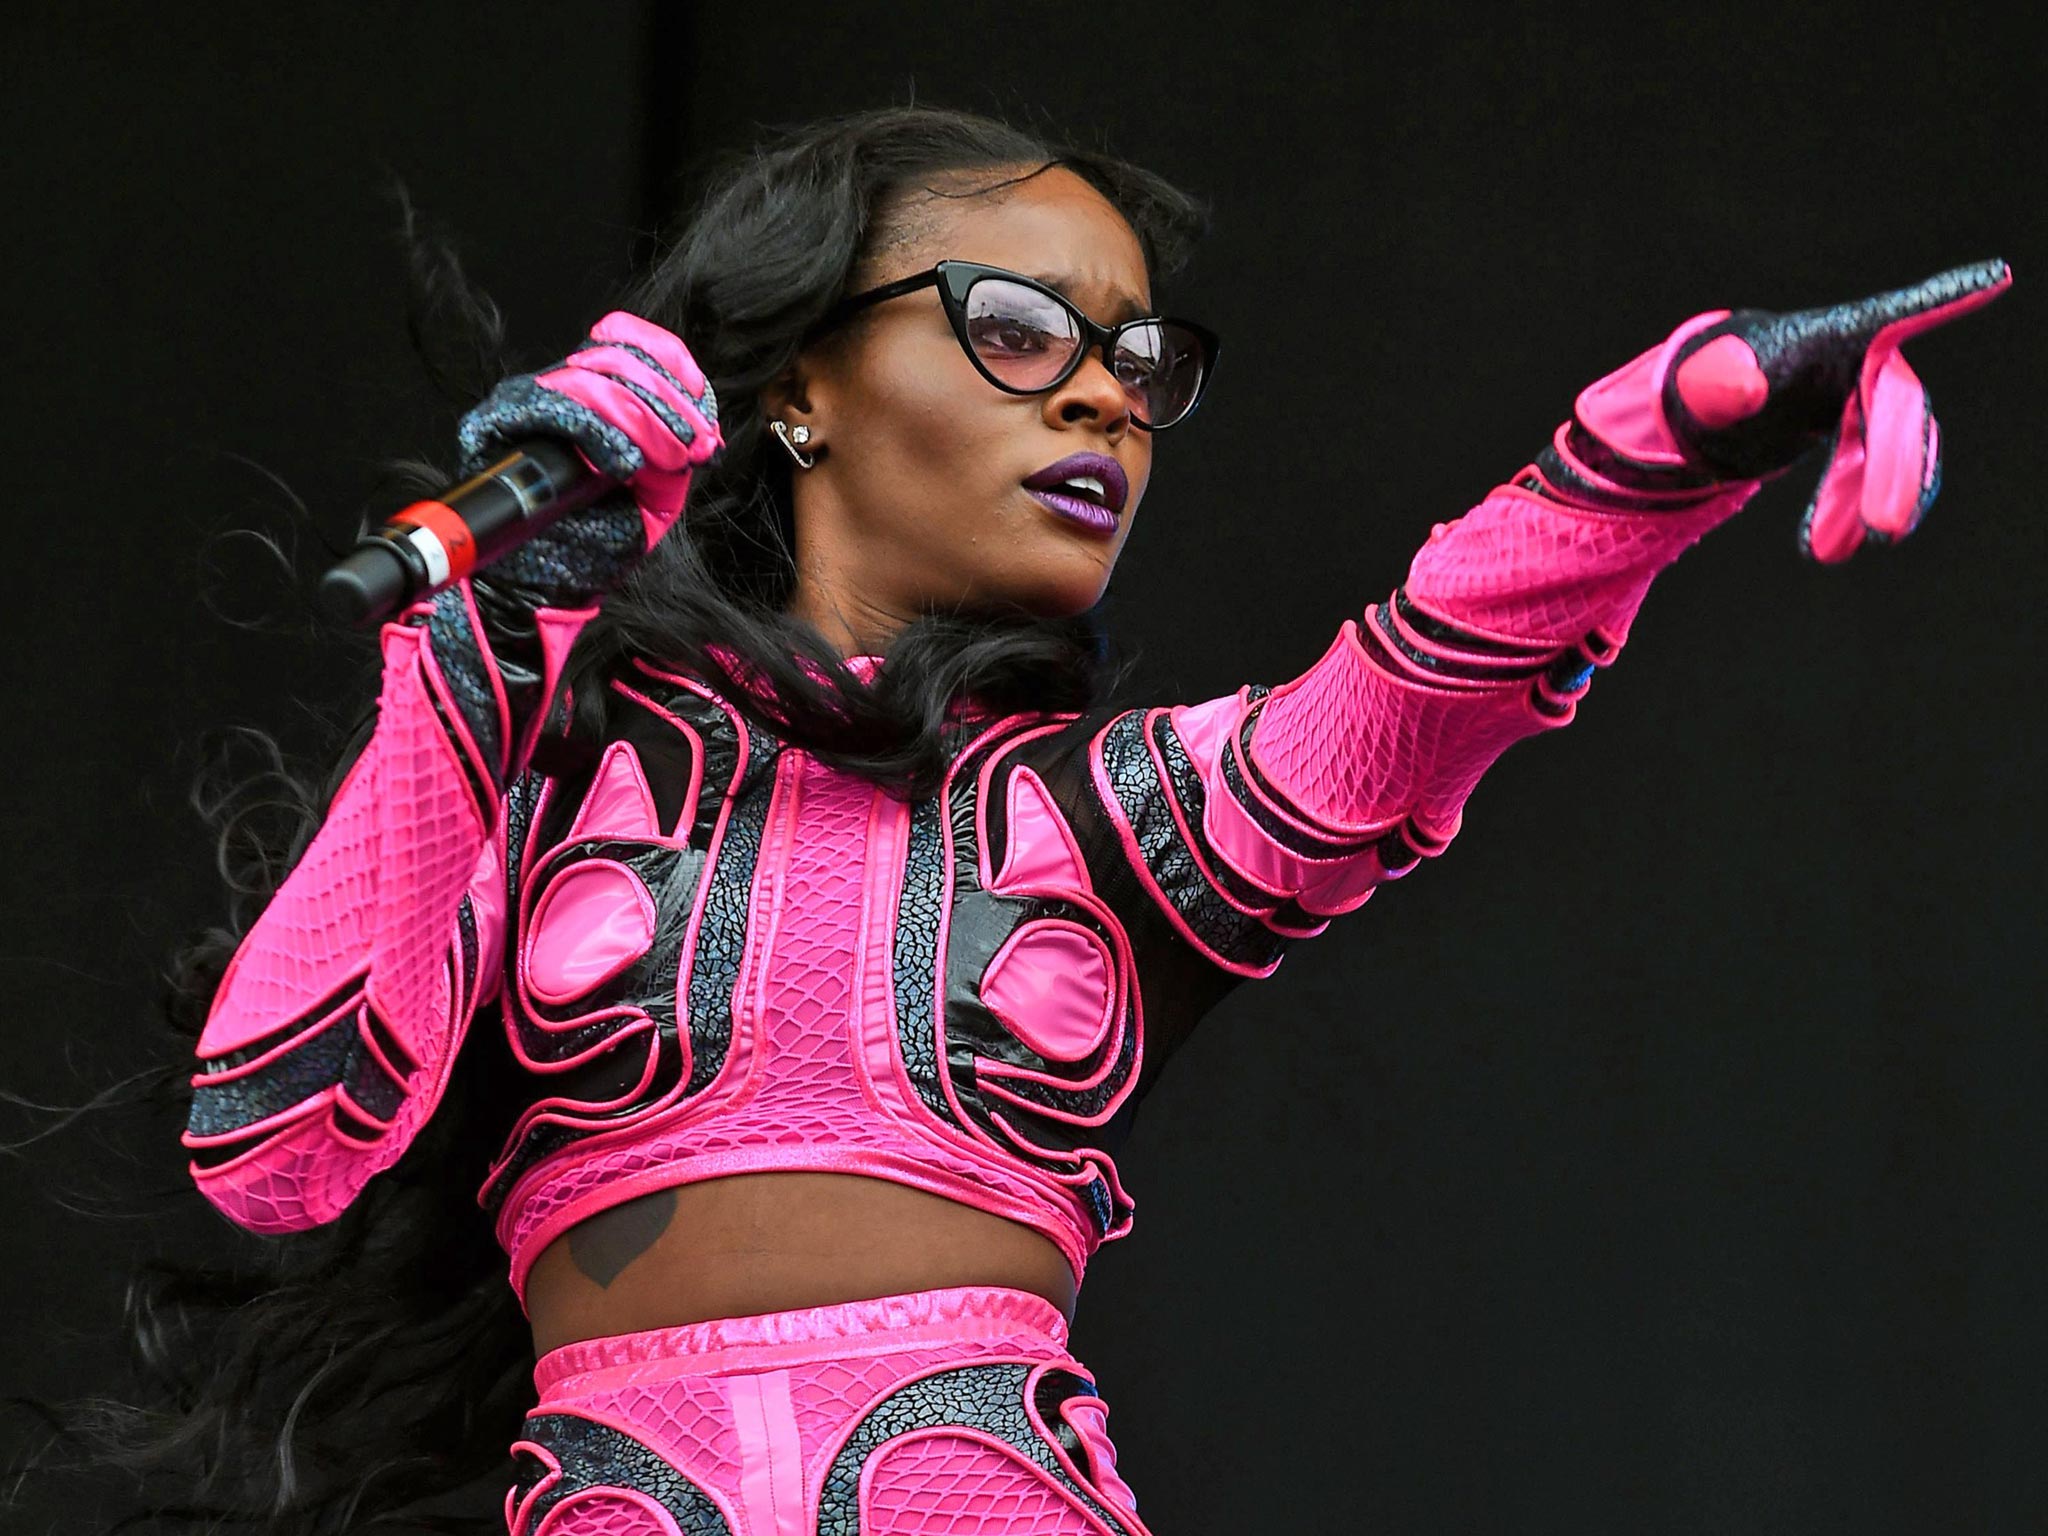 Azealia Banks performs on stage during day one of the Wireless Festival at Perry Park in Birmingham